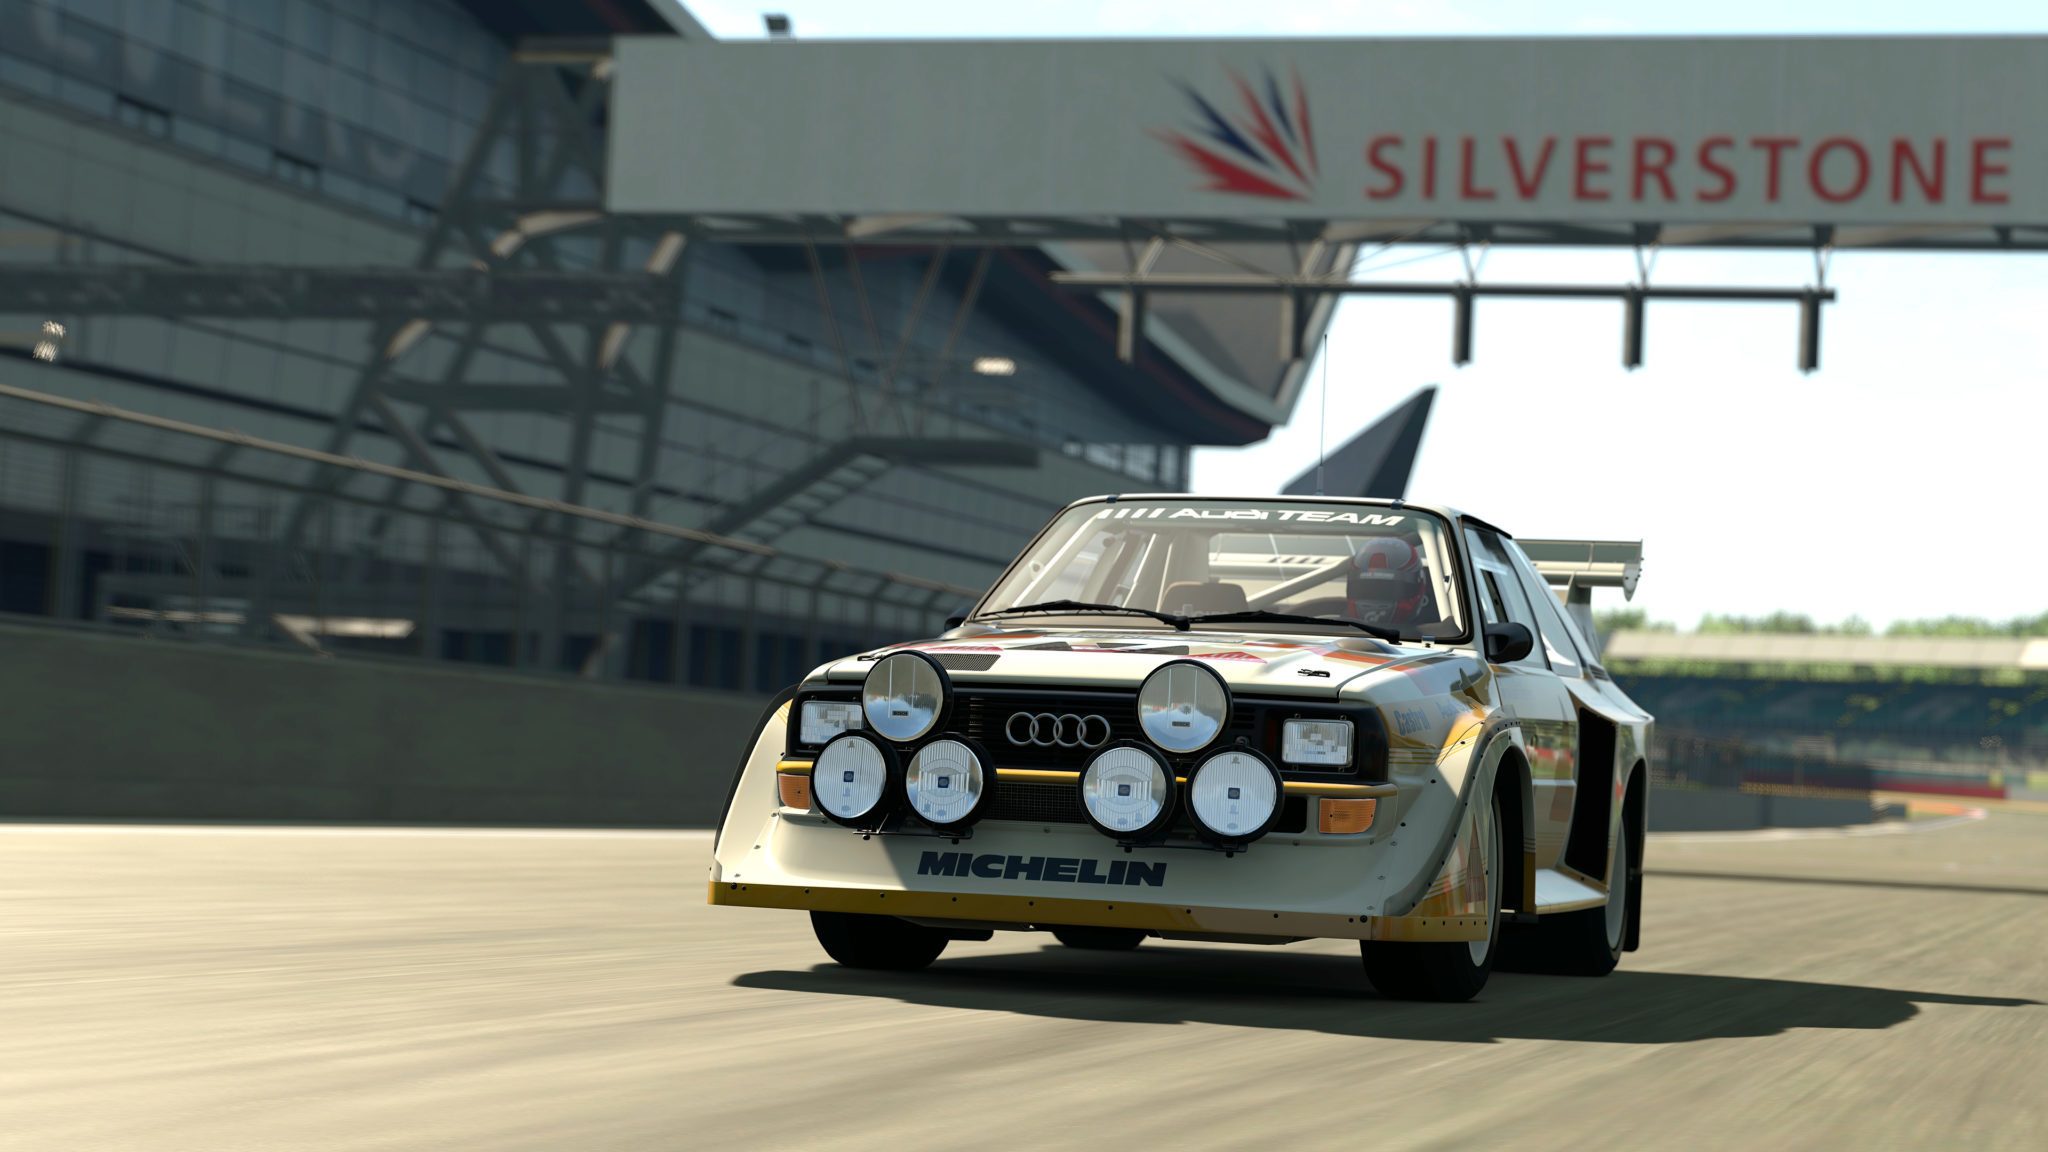 Gran Turismo 4: Prologue International Releases - Giant Bomb